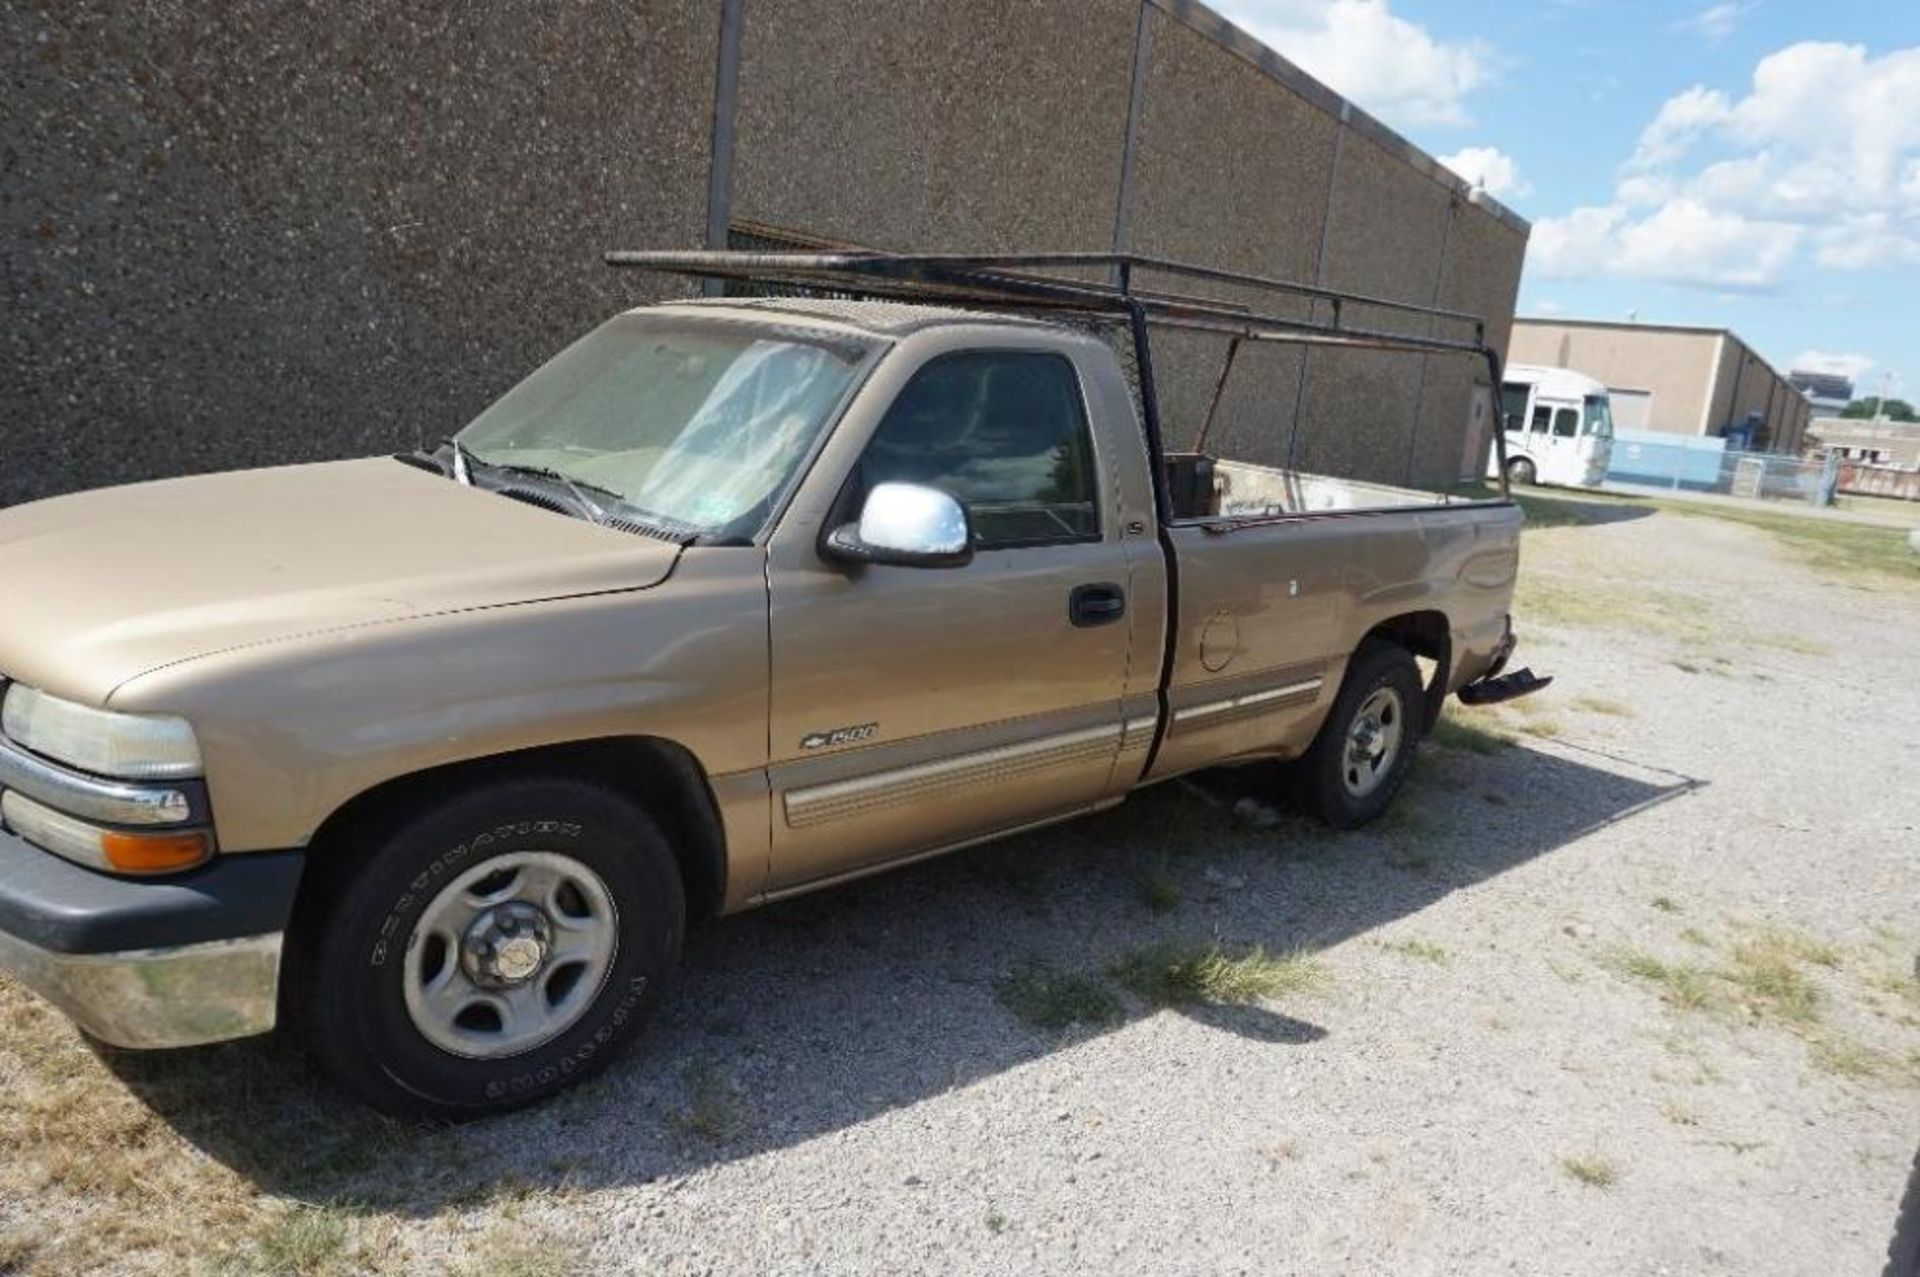 1999 Chevrolet 1/2 Ton Pick Up Truck (Gold) with Delivery Rack